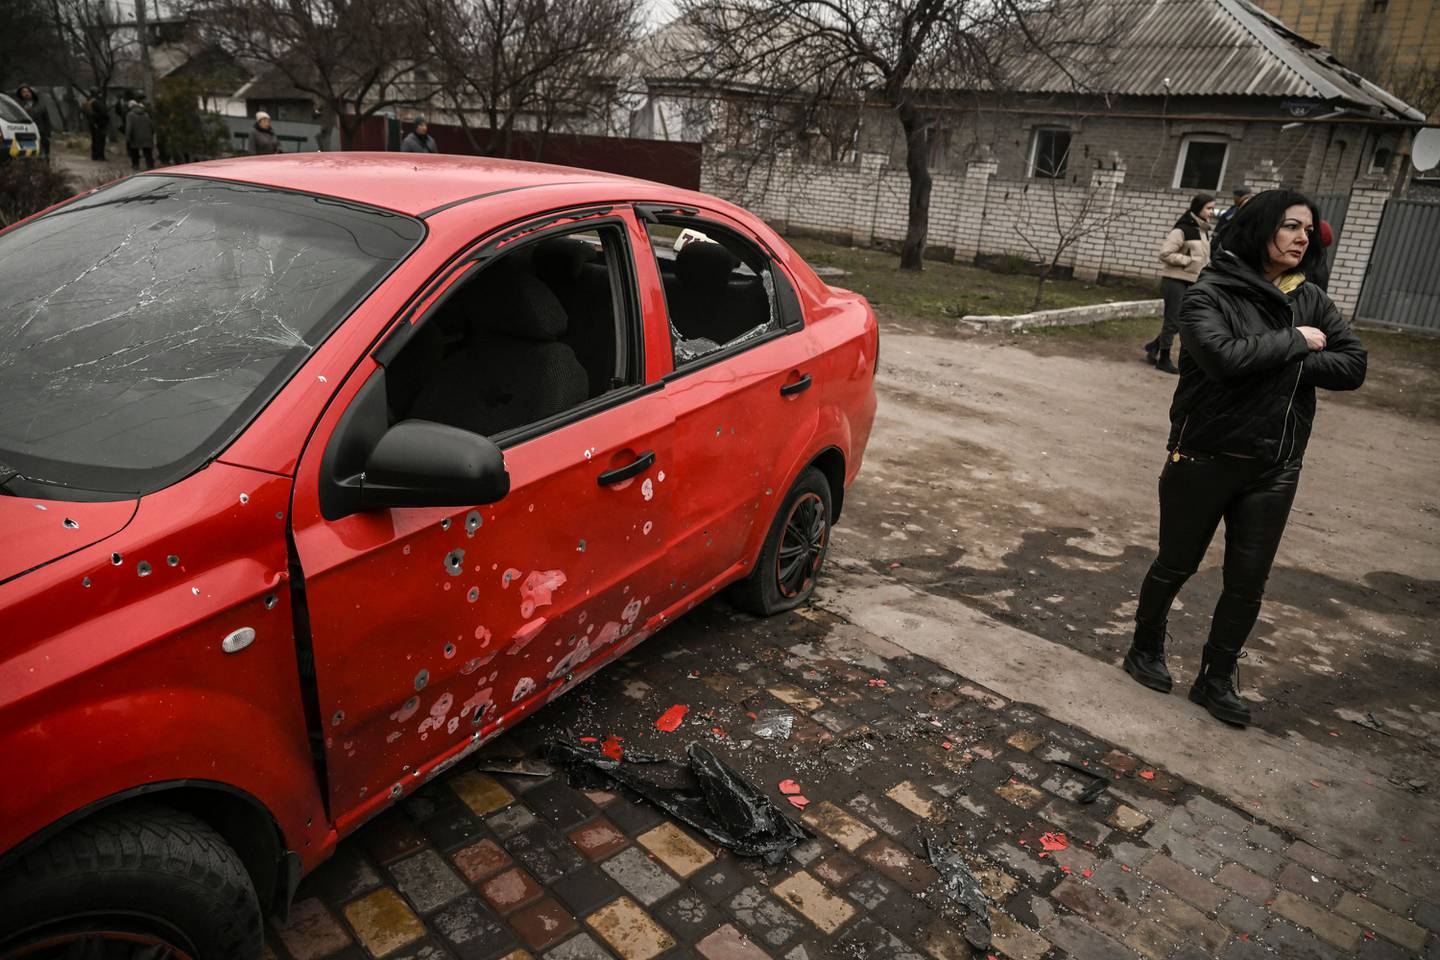 A woman stands next to a damaged car after a cluster bomb strike in Kramatorsk in the Donbas region on March 18, 2023. (Photo by Aris Messinis / AFP)